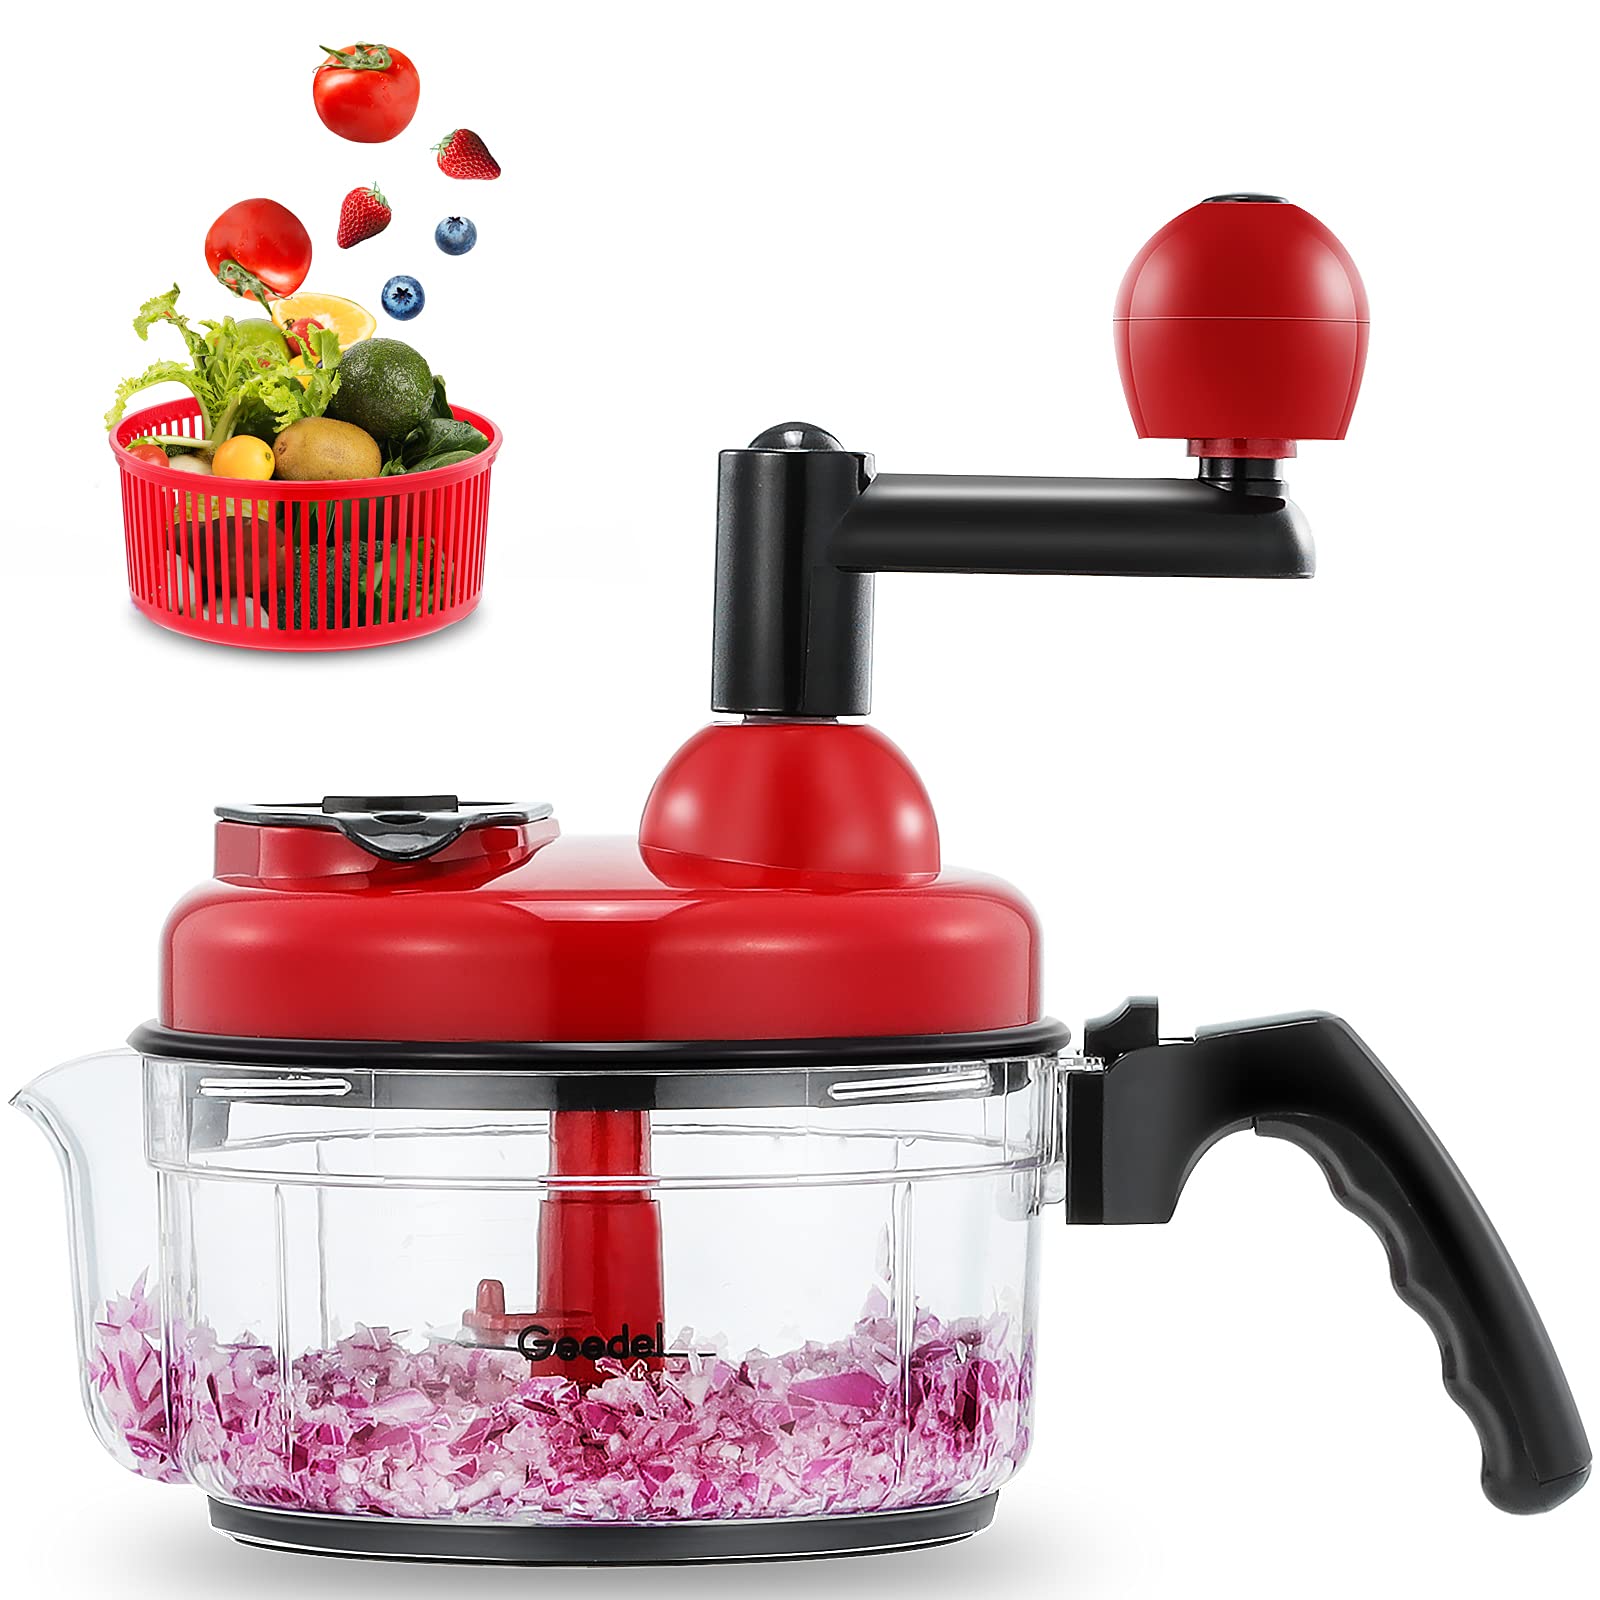 Geedel Hand Food Chopper, Vegetable Quick Chopper Manual Food Processor, Easy To Clean Food Dicer Mincer Mixer Blender, Rotary O